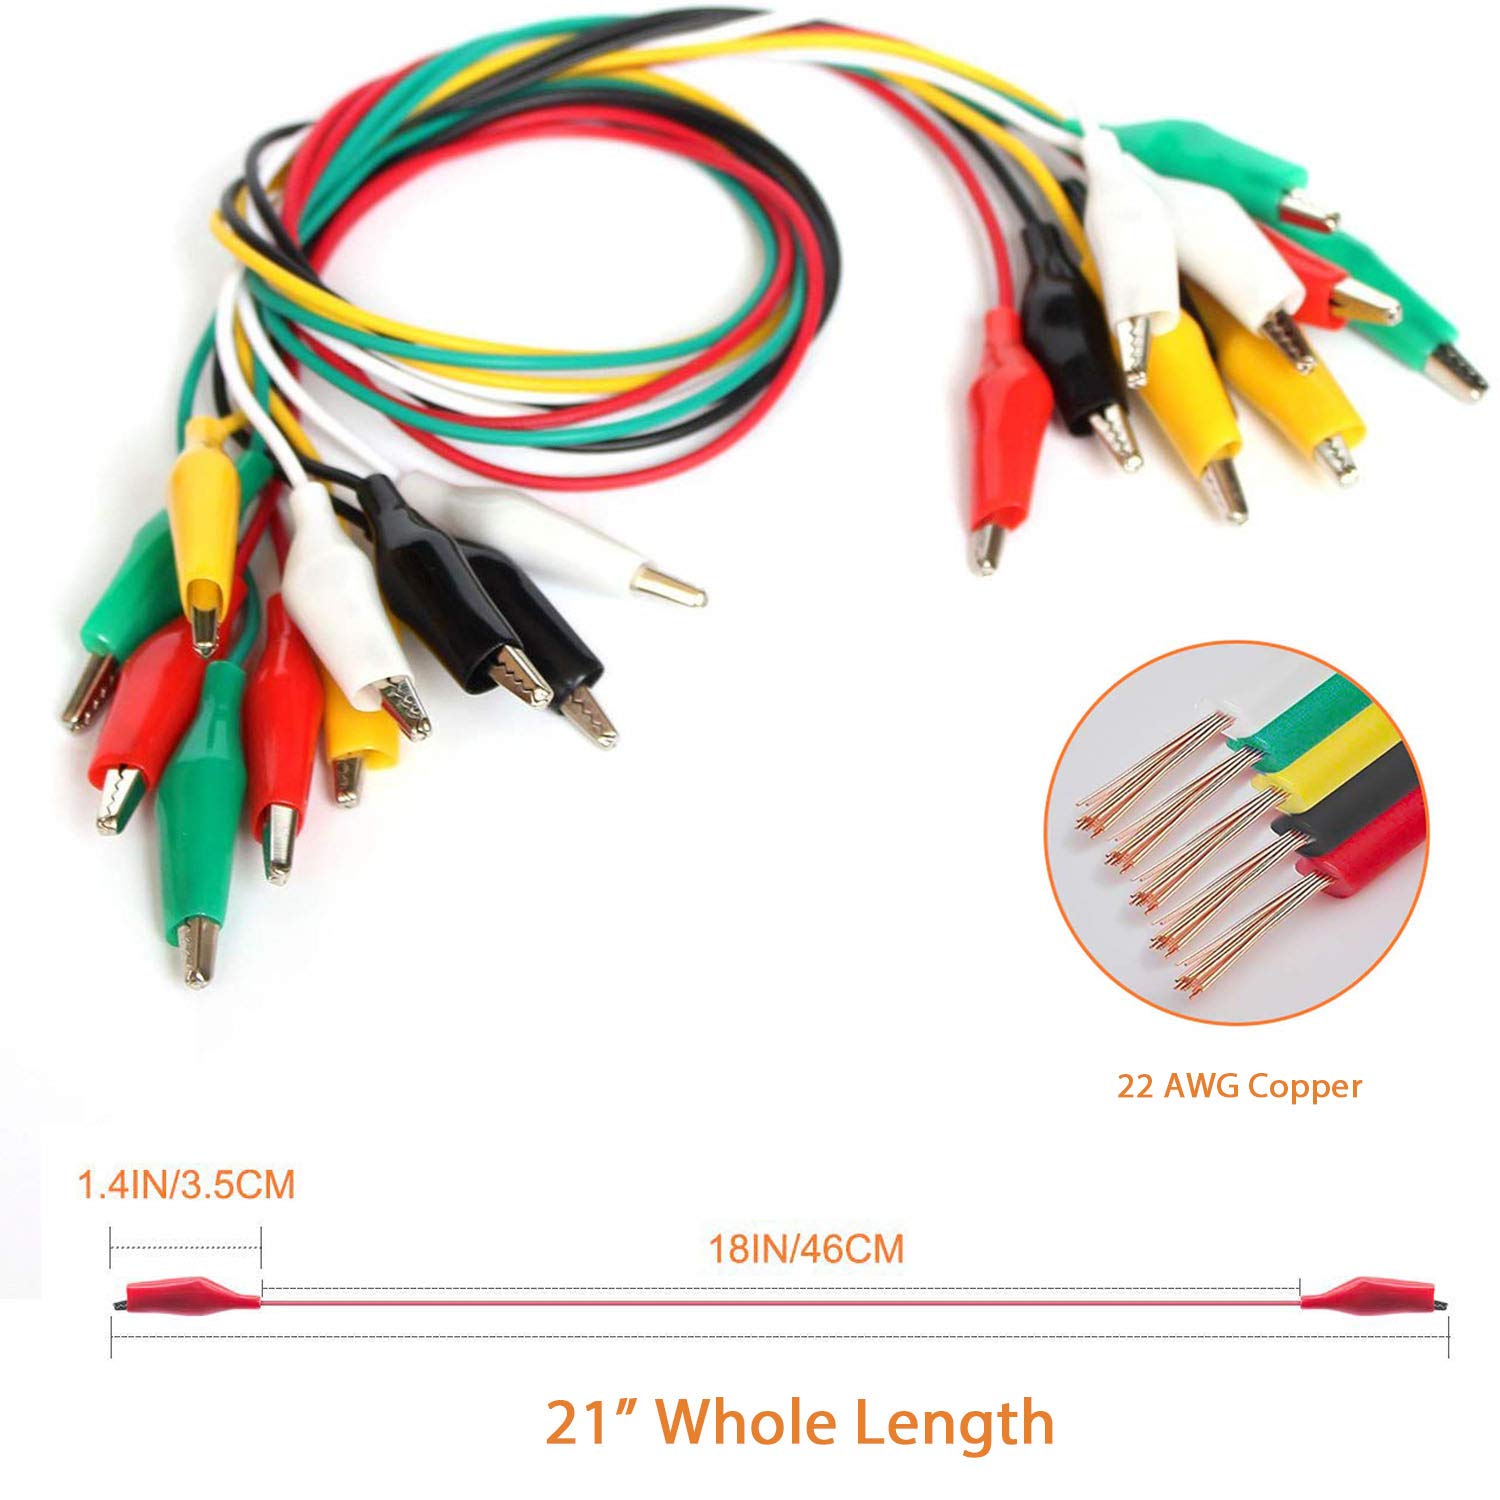 KET02 DIY Electrical Alligator Clips with Wires Test Leads Sets